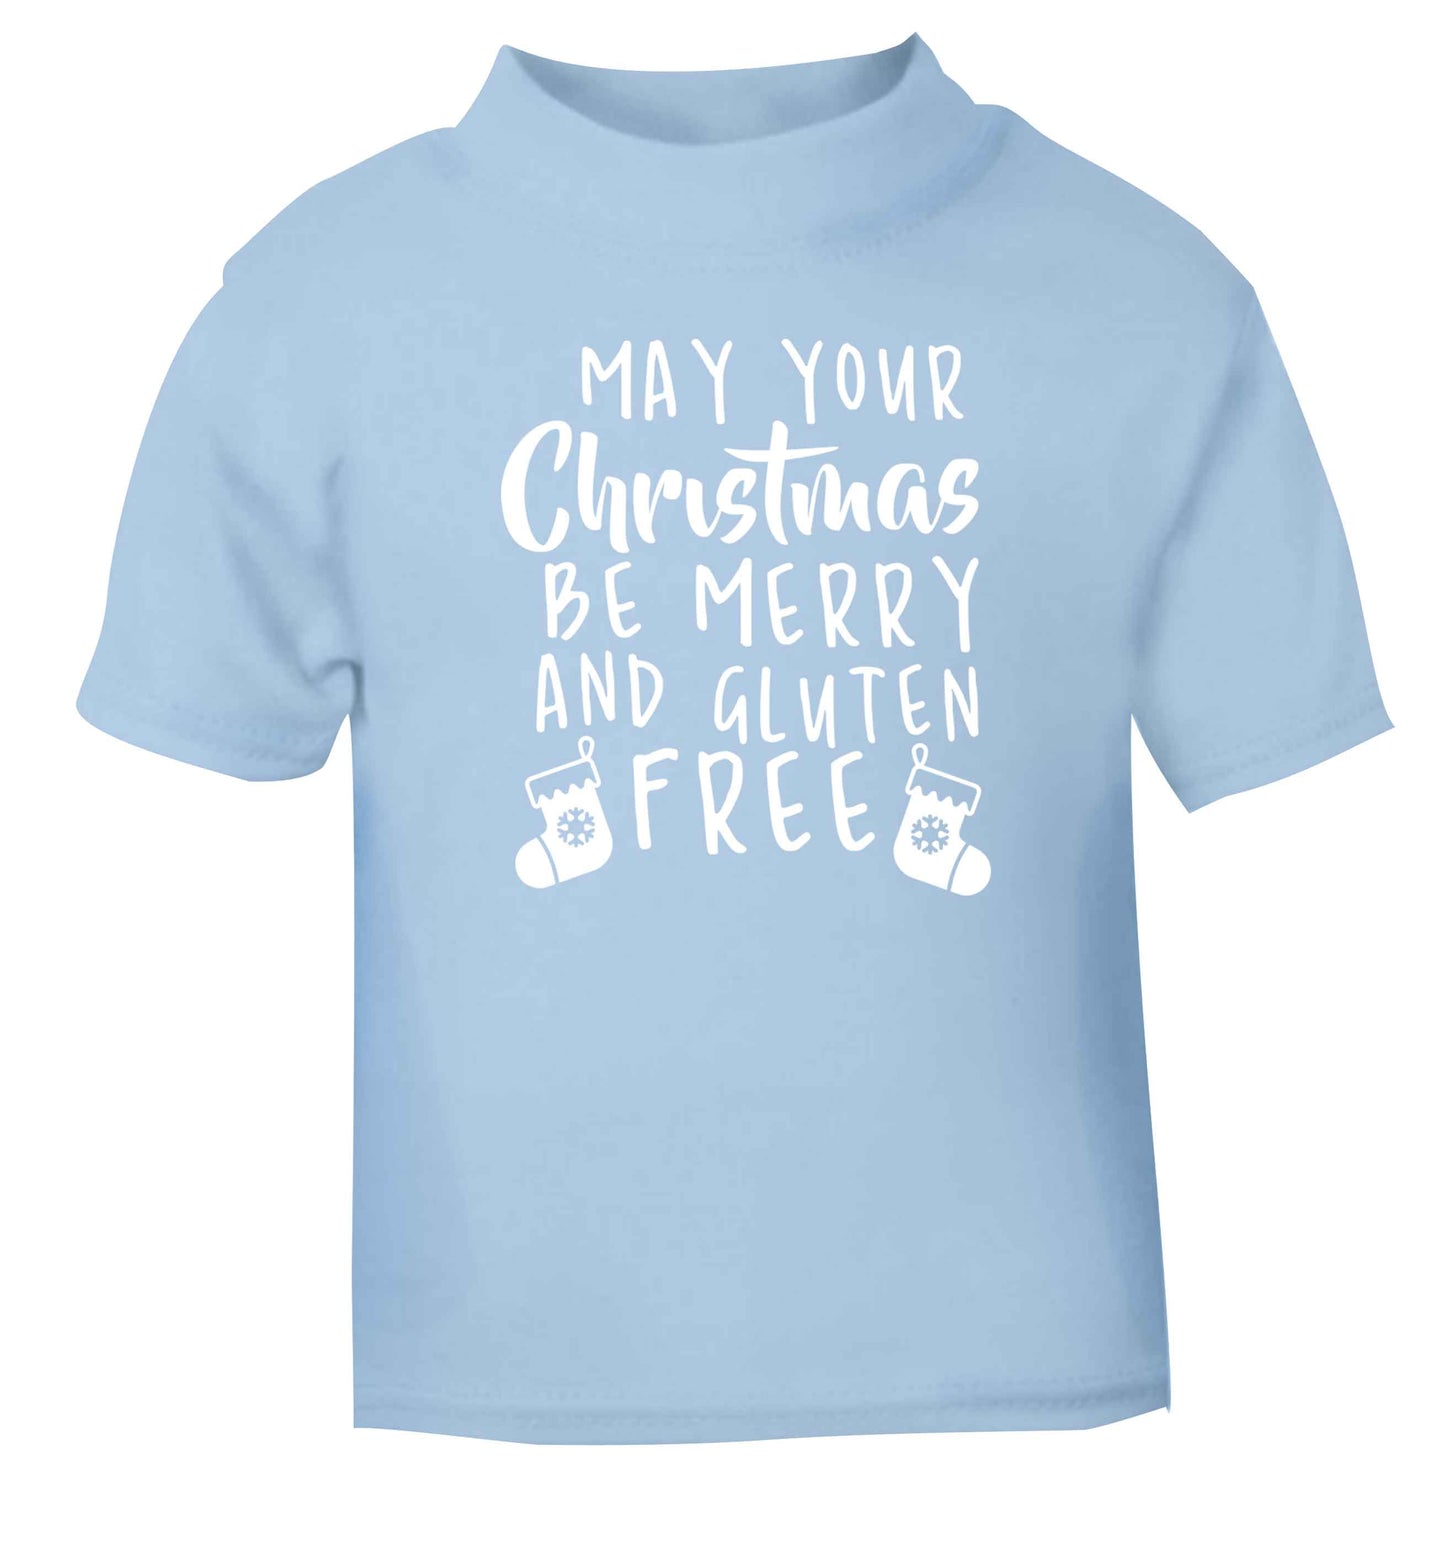 May your Christmas be merry and gluten free light blue Baby Toddler Tshirt 2 Years